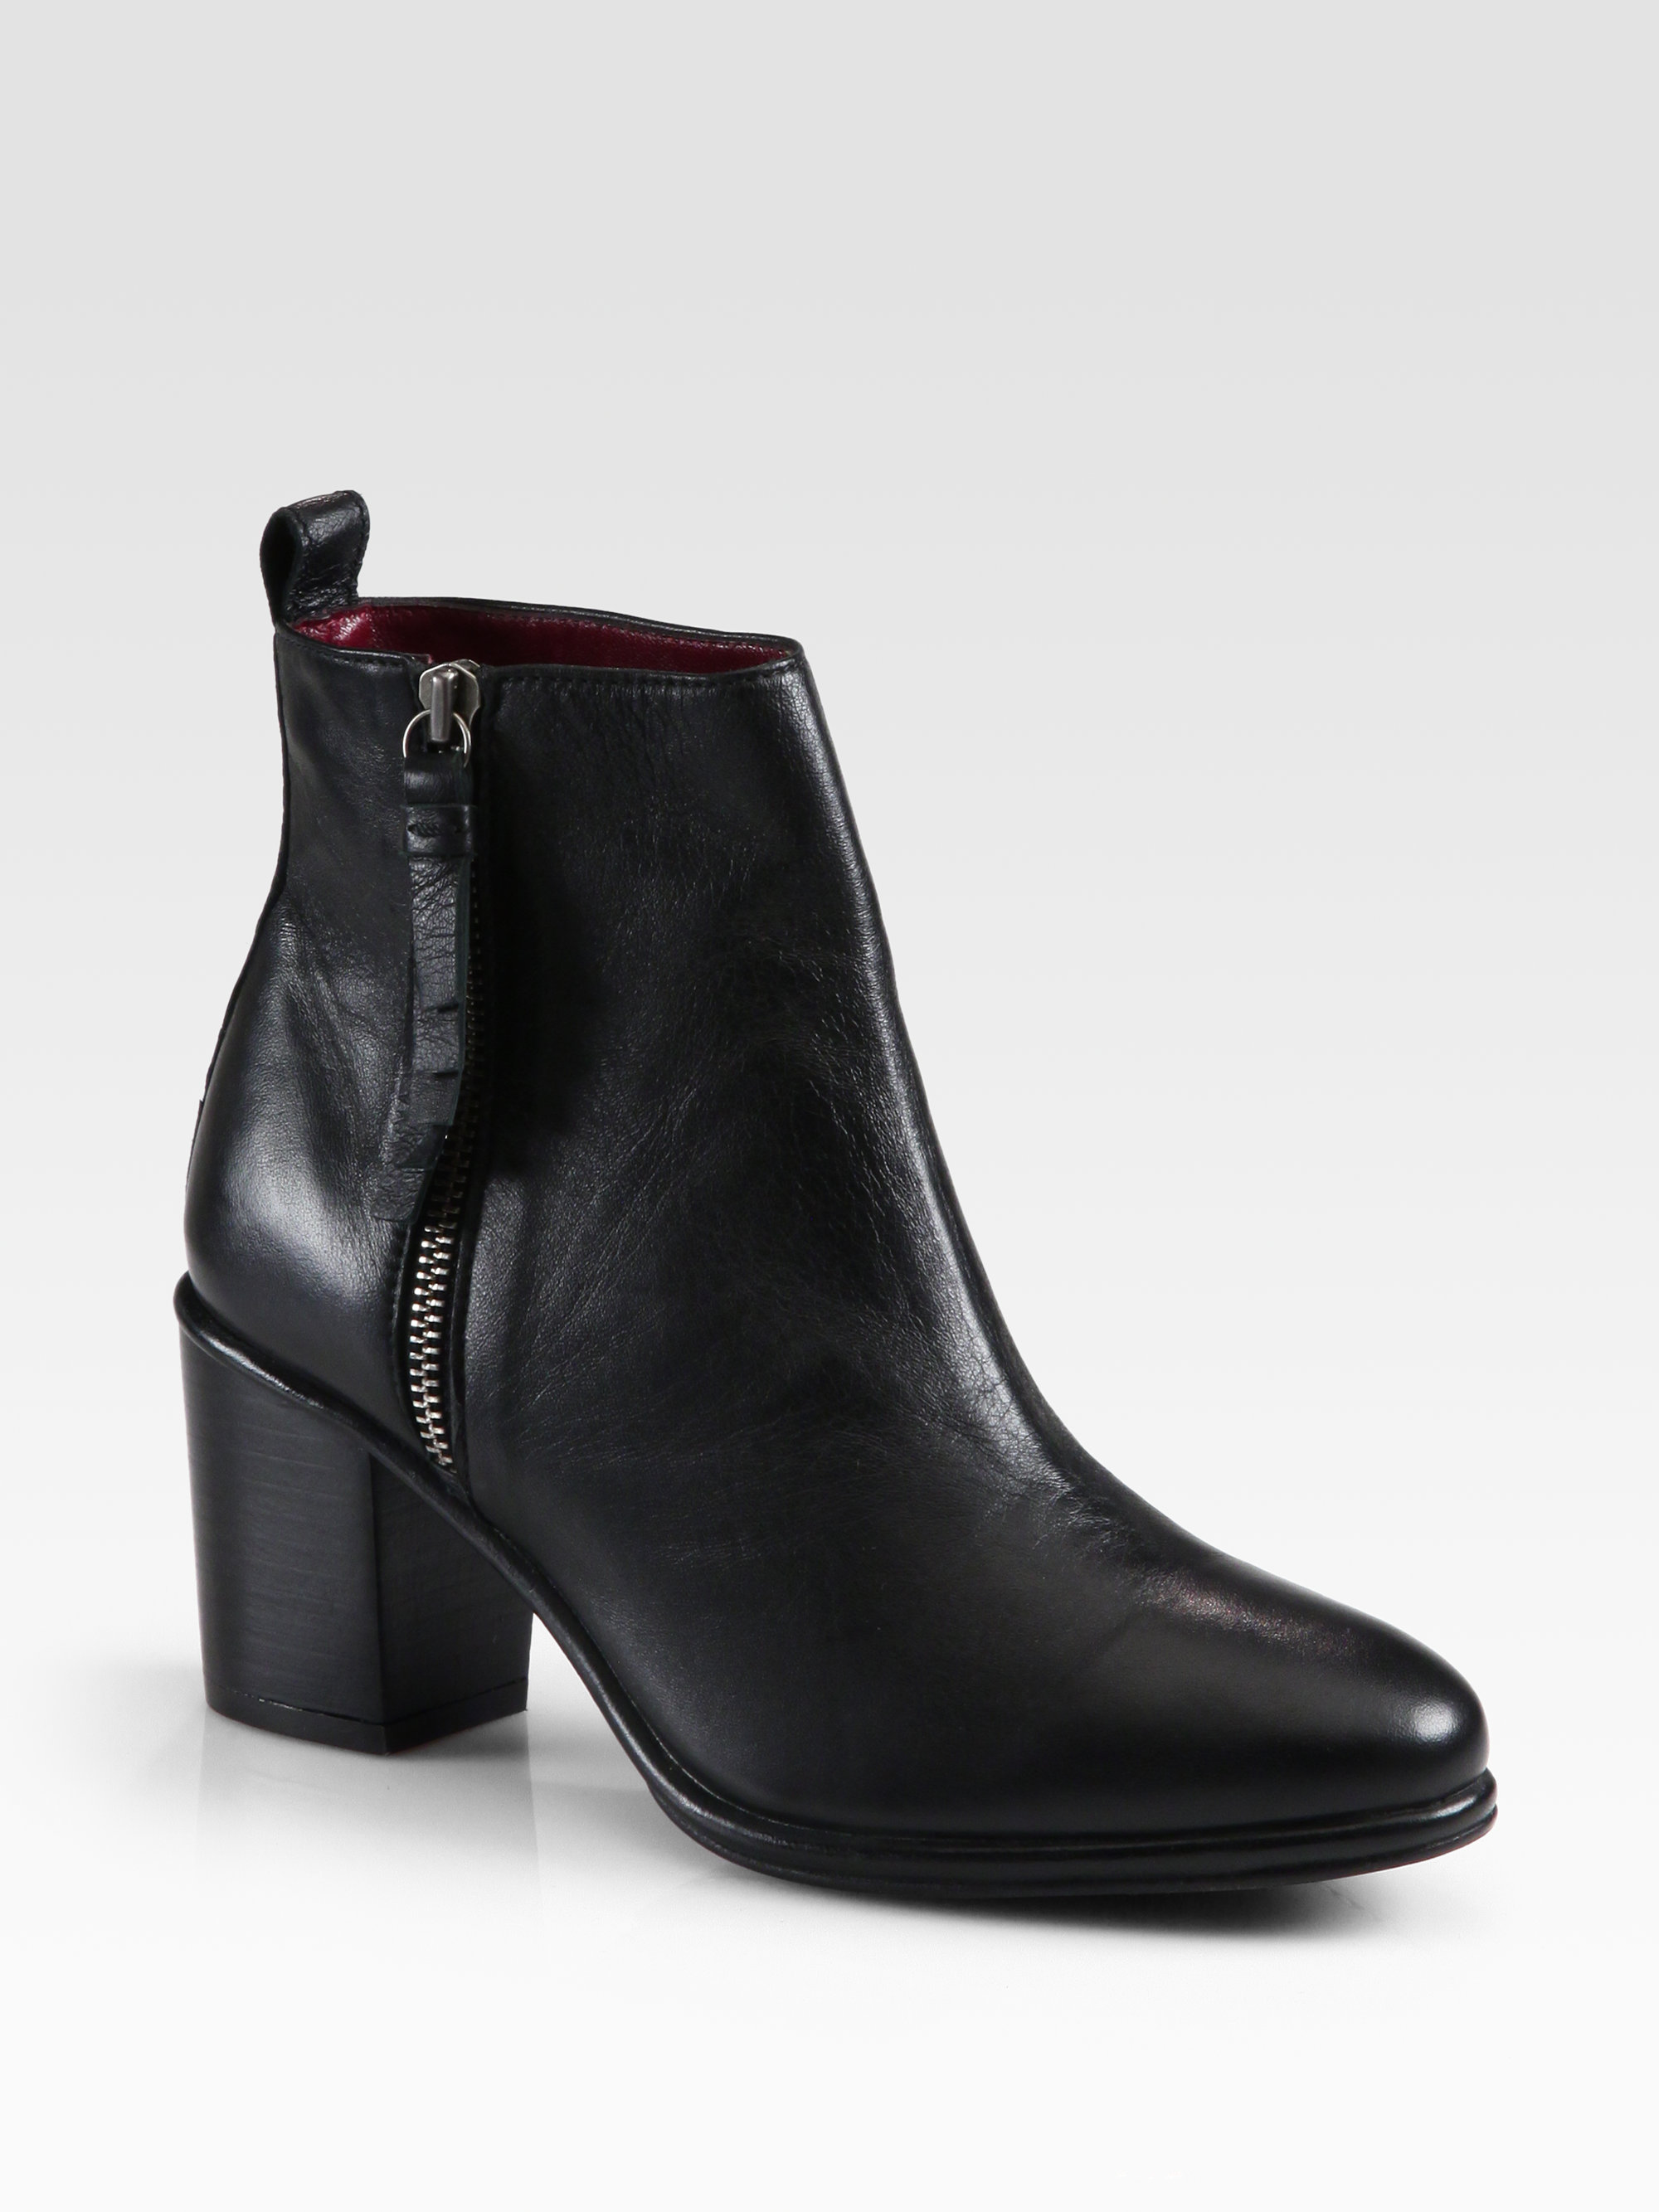 Opening Ceremony Brenda Leather Ankle Boots in Black | Lyst